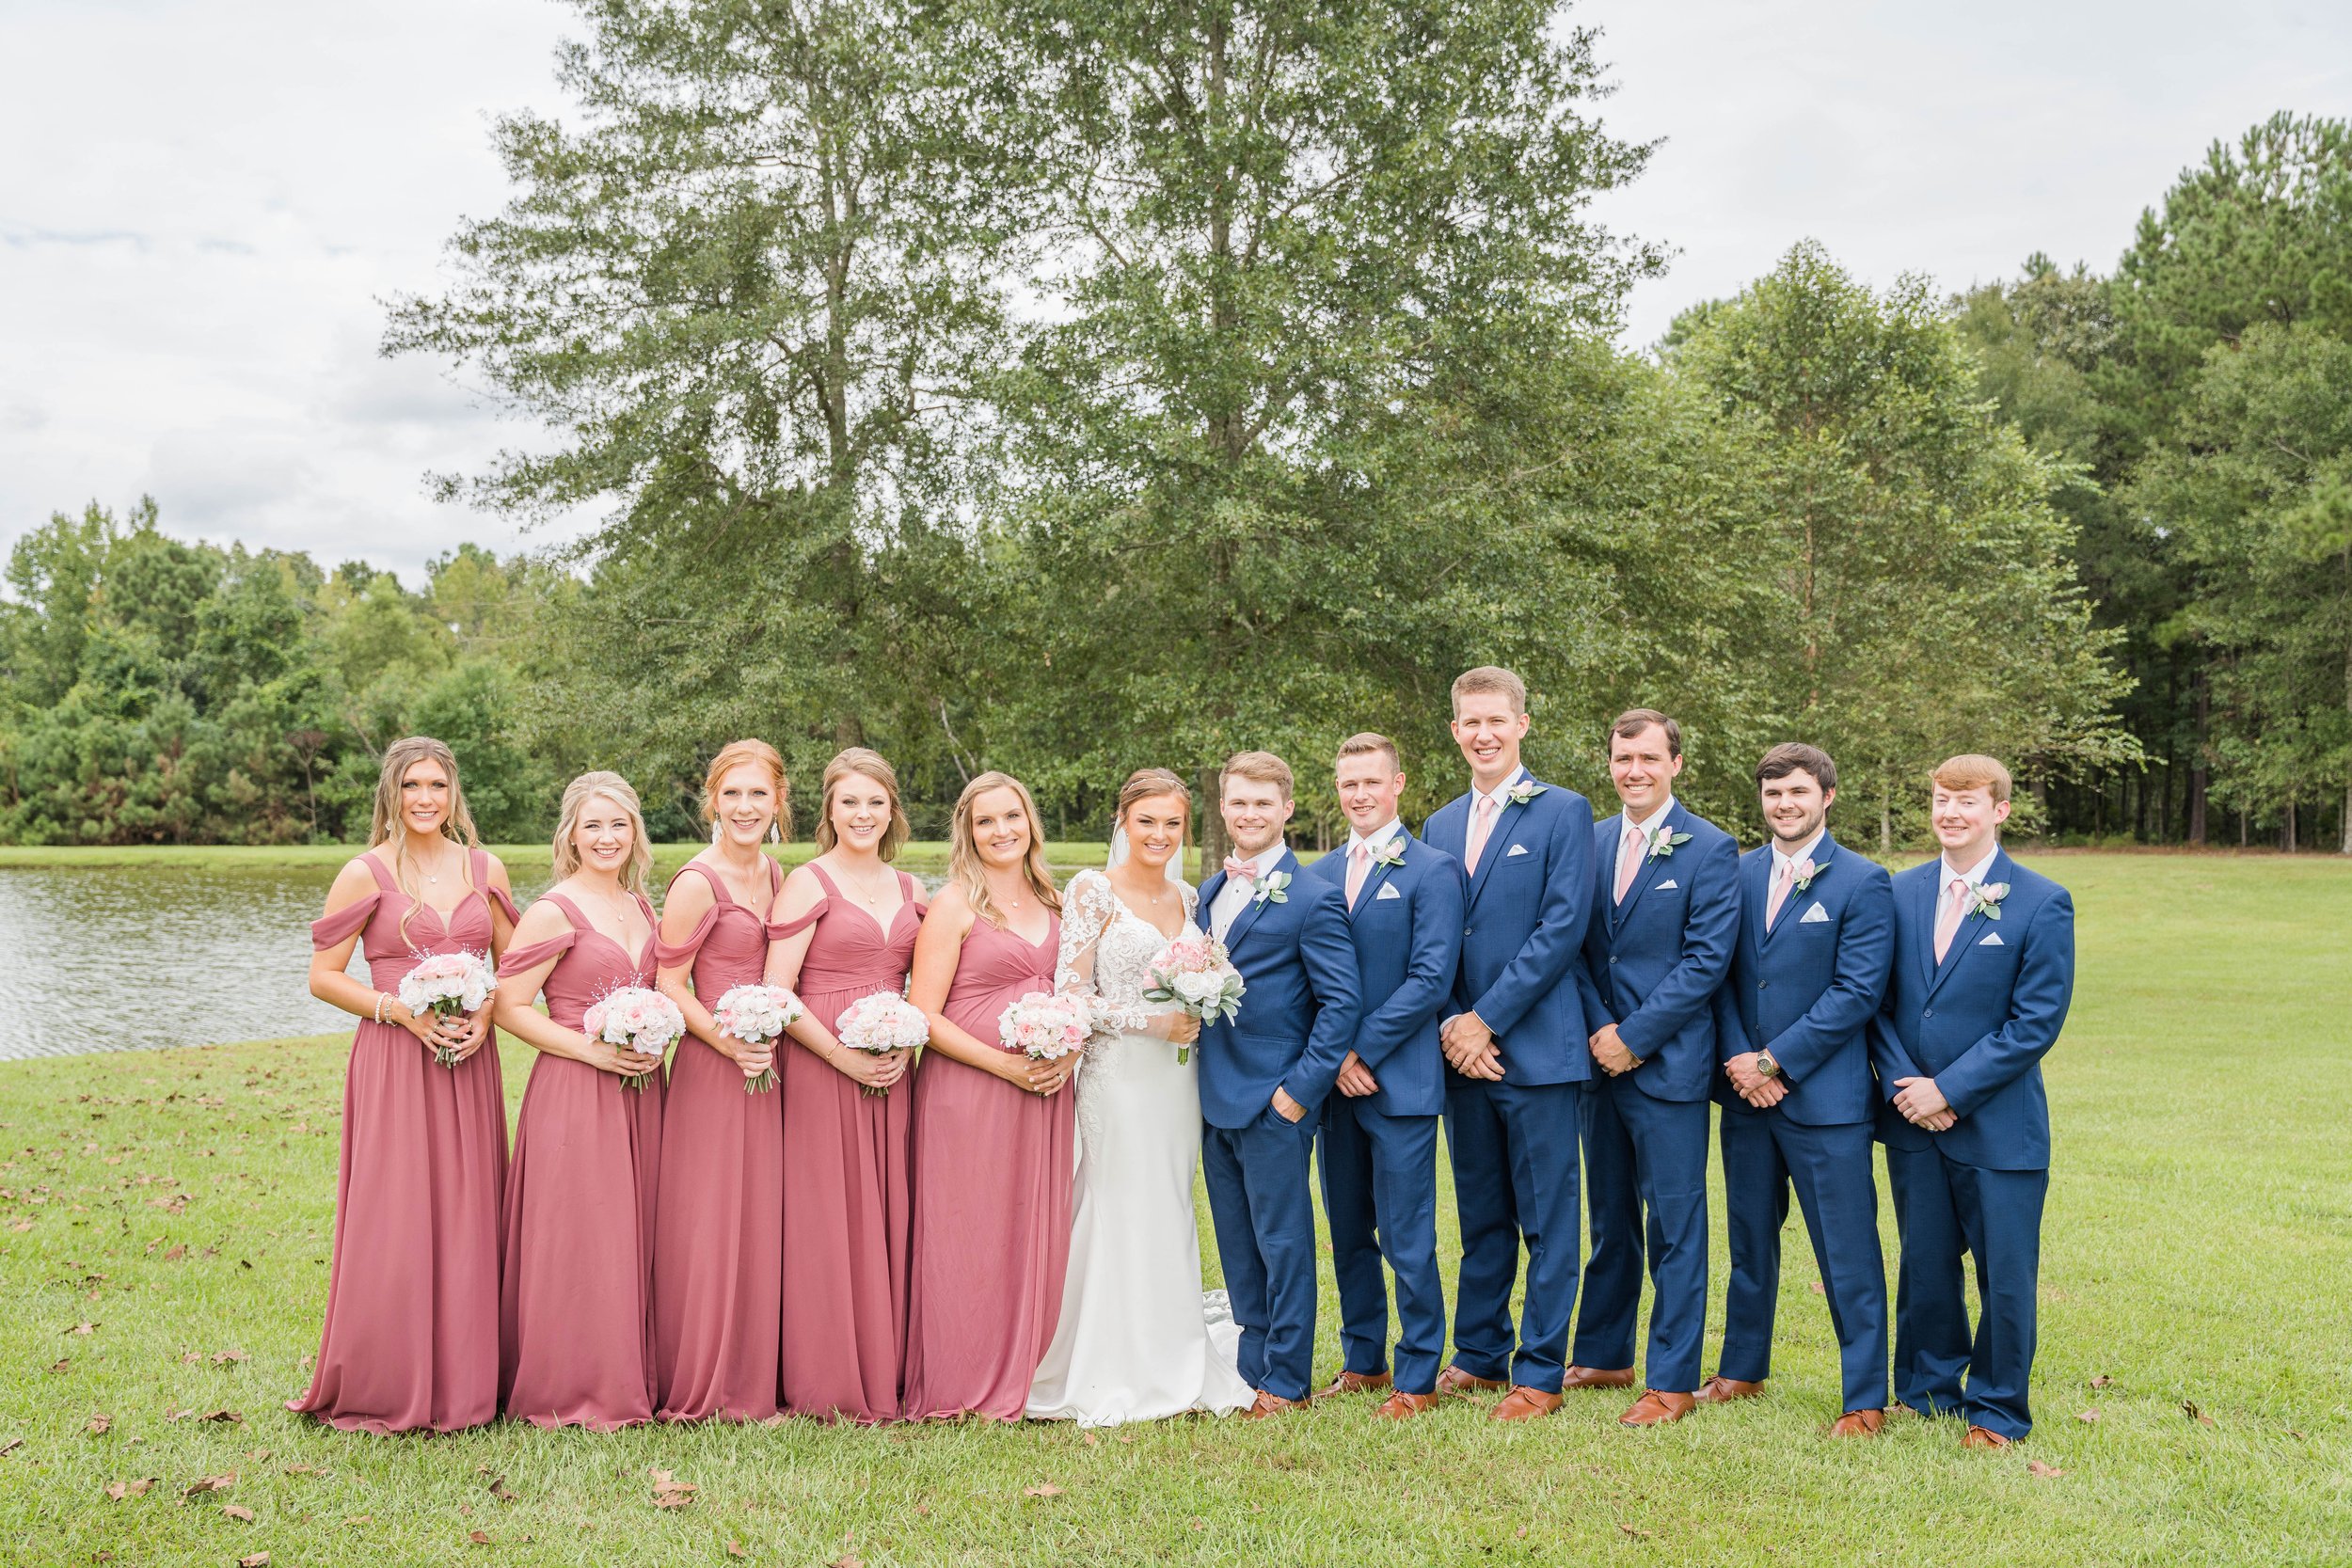 Barn at Bridlewood Hattiesburg Mississippi Wedding Photographed by Kristen Marcus Photography | Mississippi Wedding Photographer